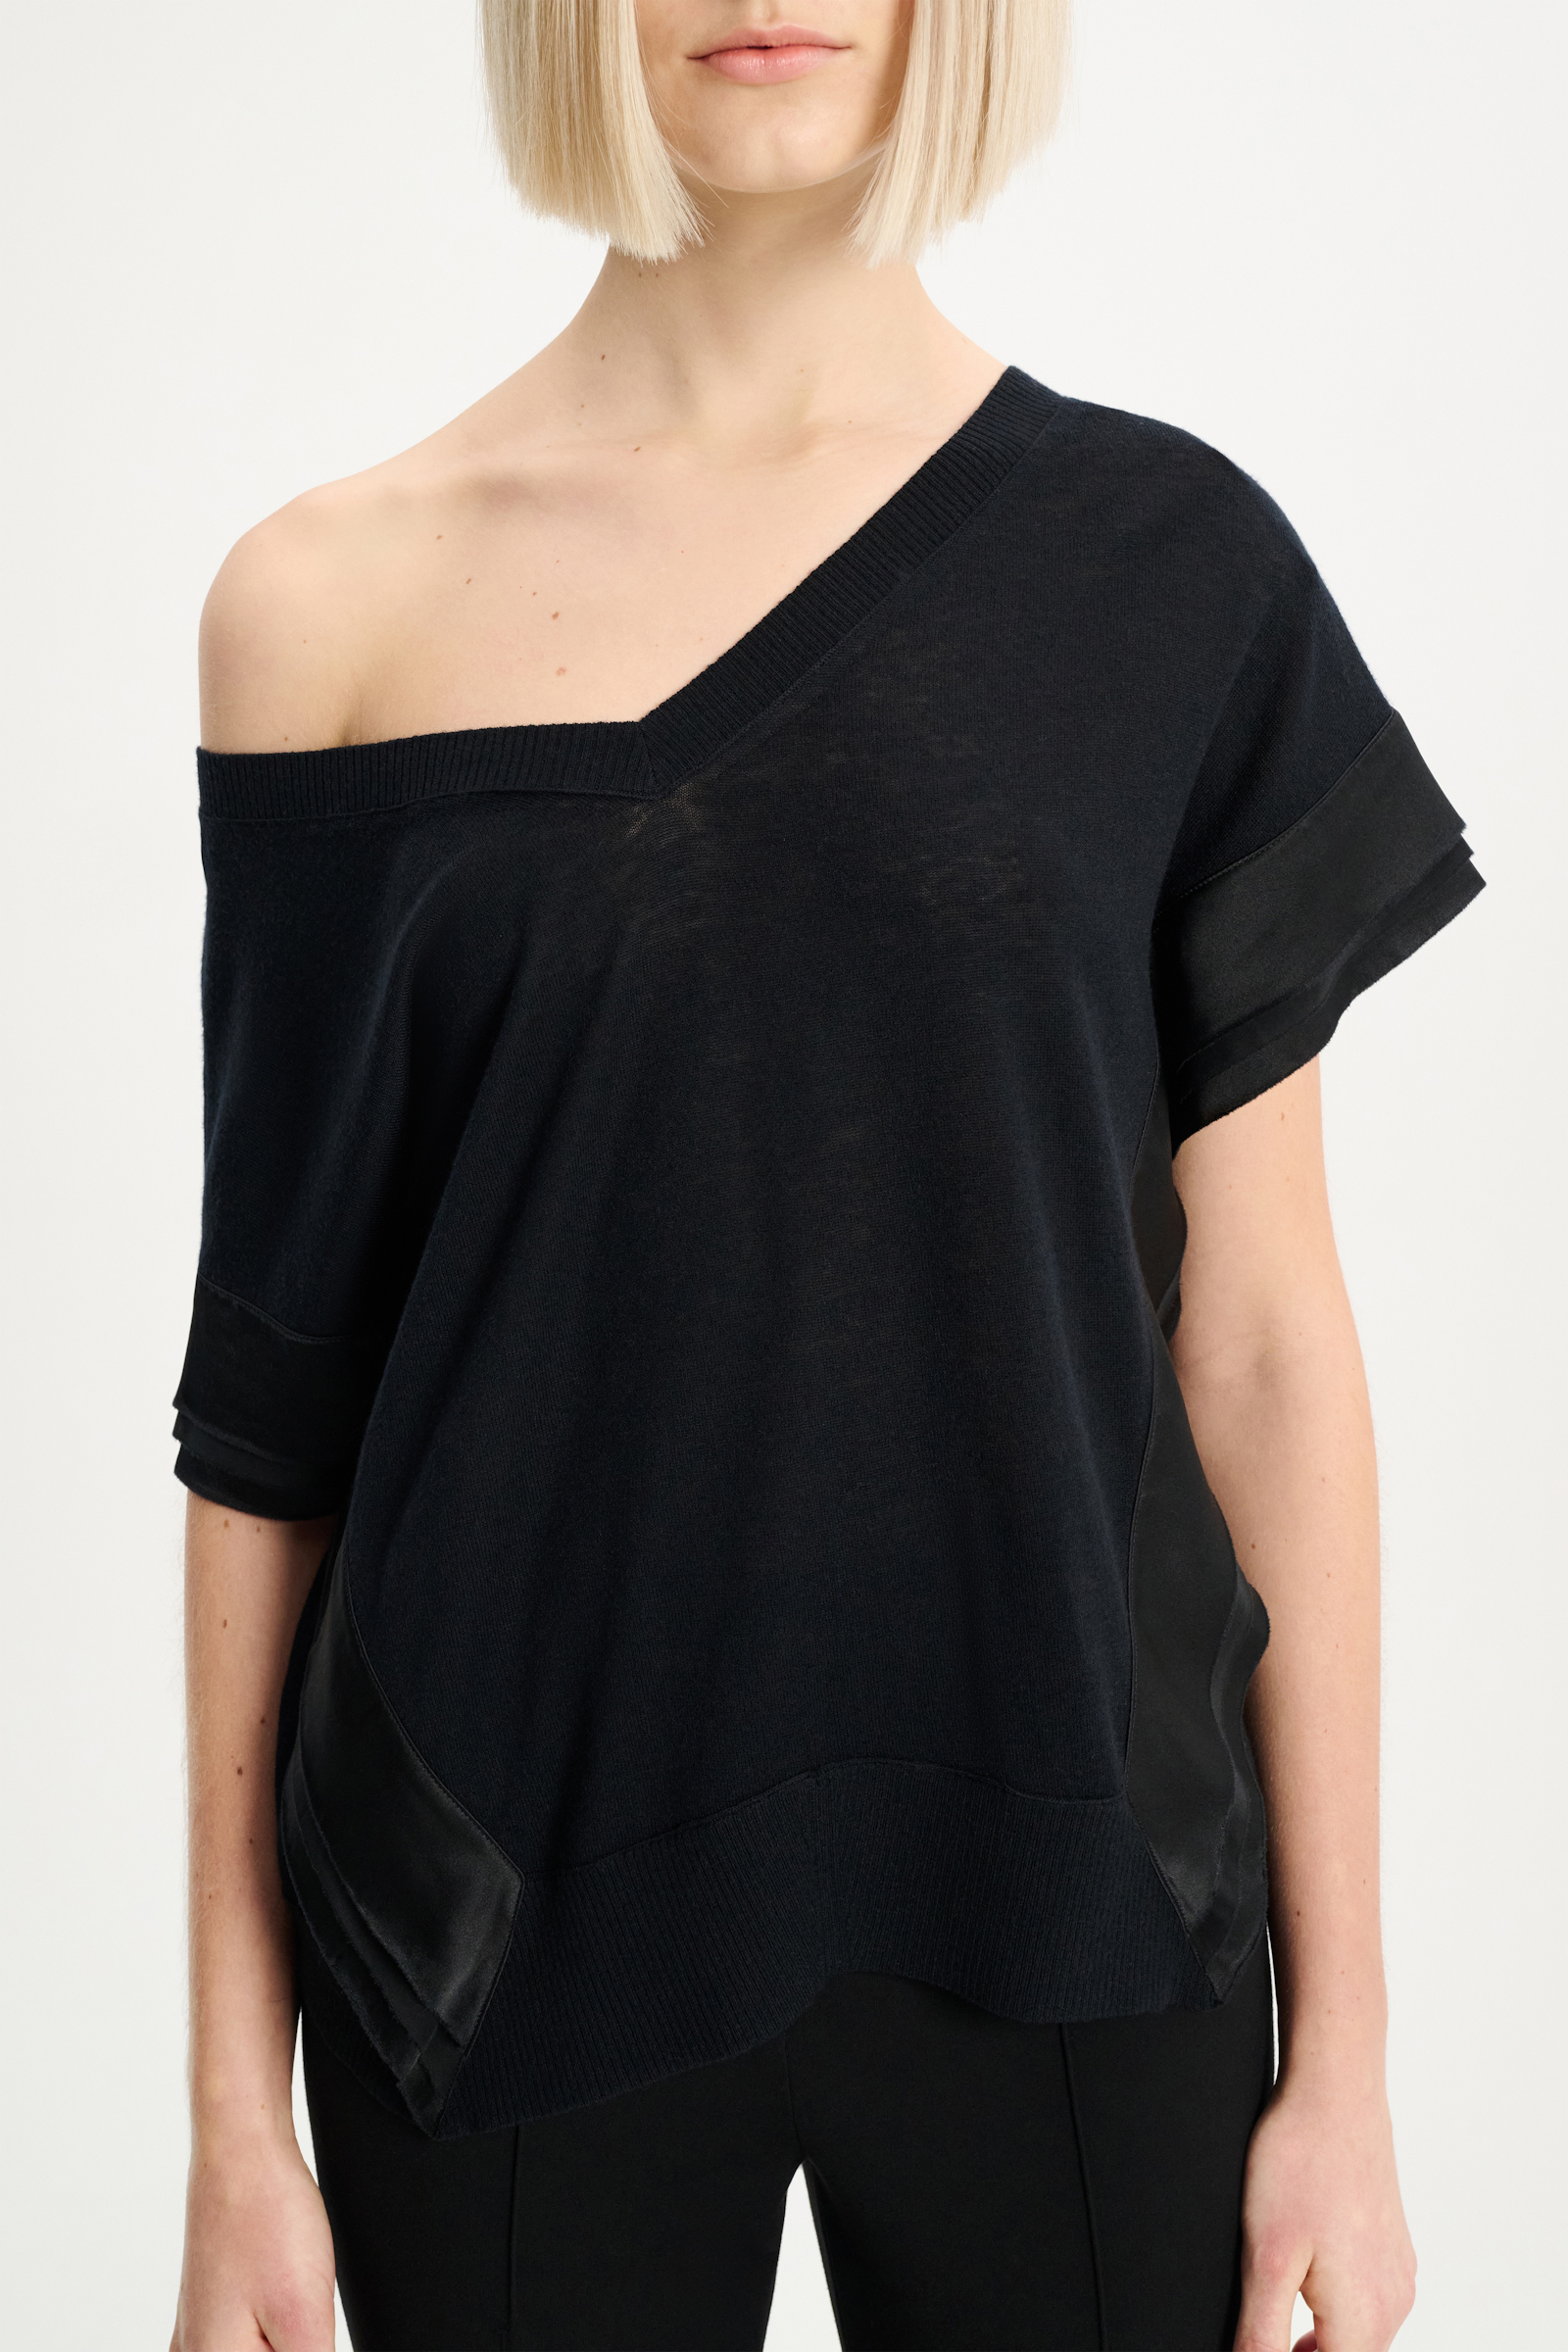 Dorothee Schumacher Wool-cashmere knit top with layered satin trim pure black